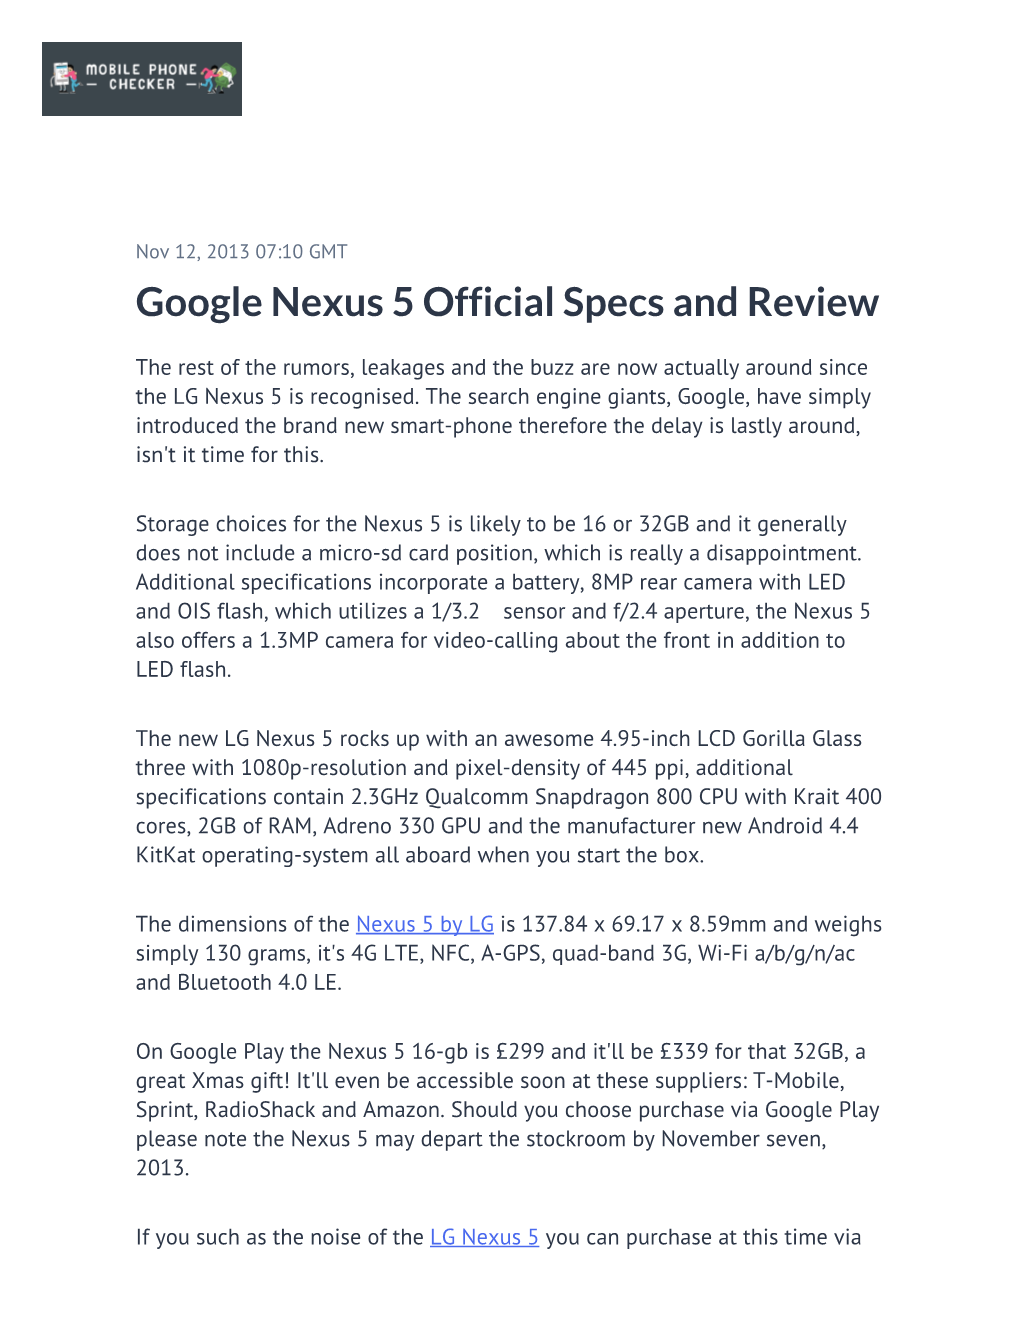 Google Nexus 5 Official Specs and Review